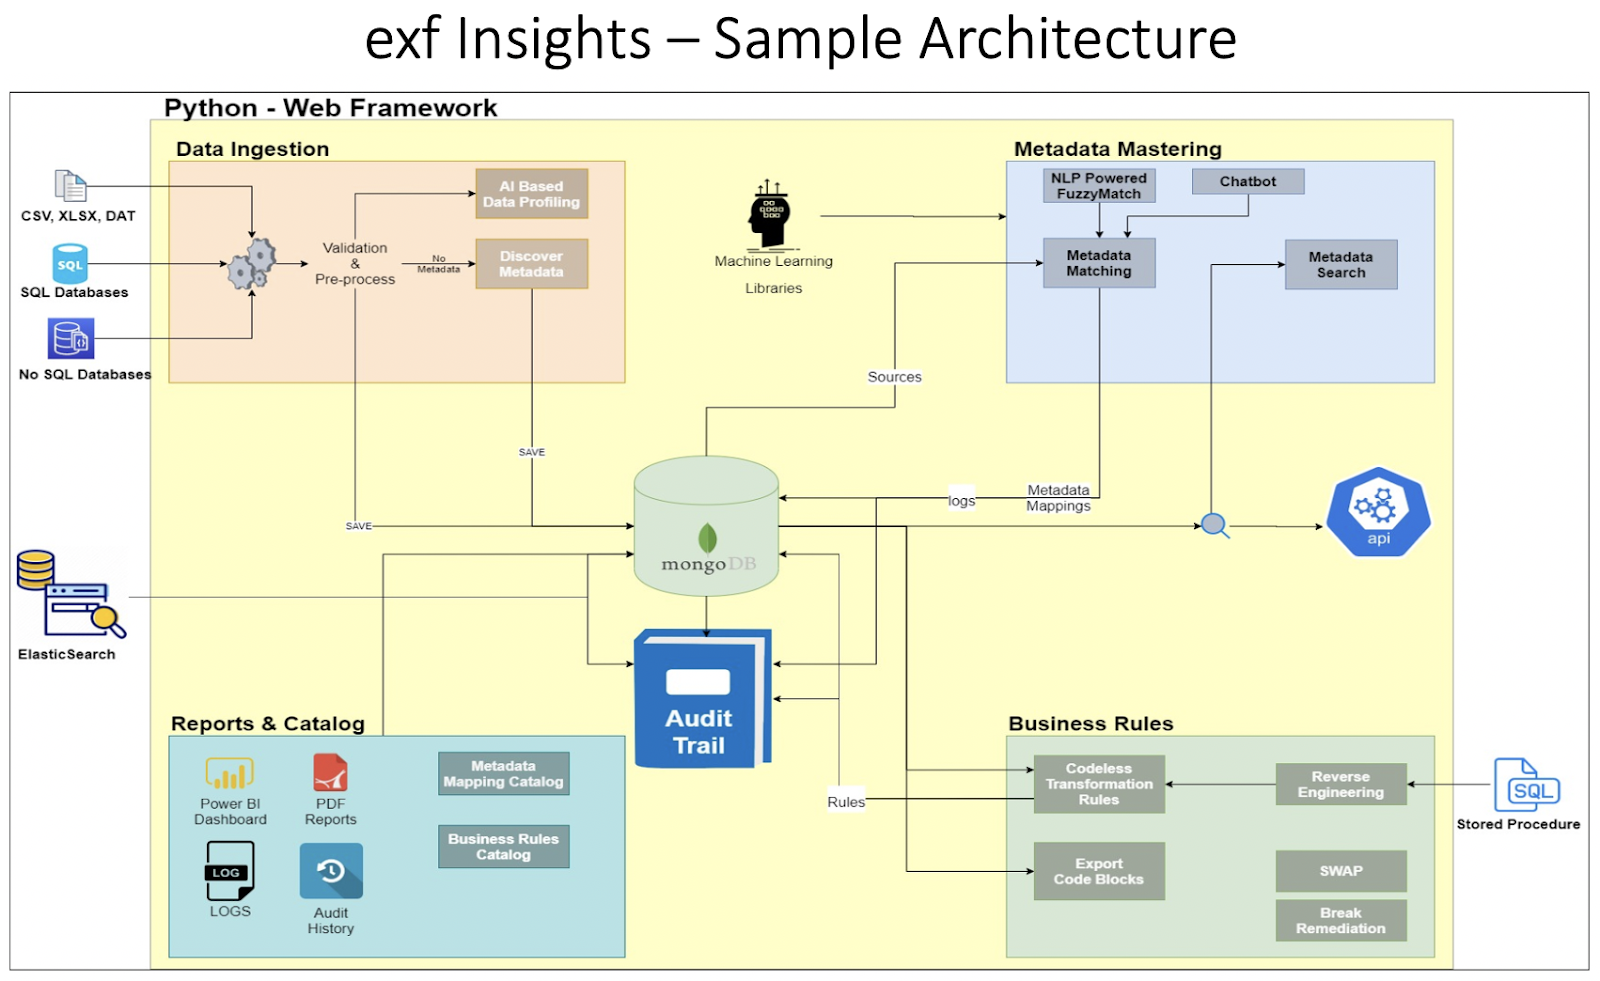 exf Insights - Sample Architecture